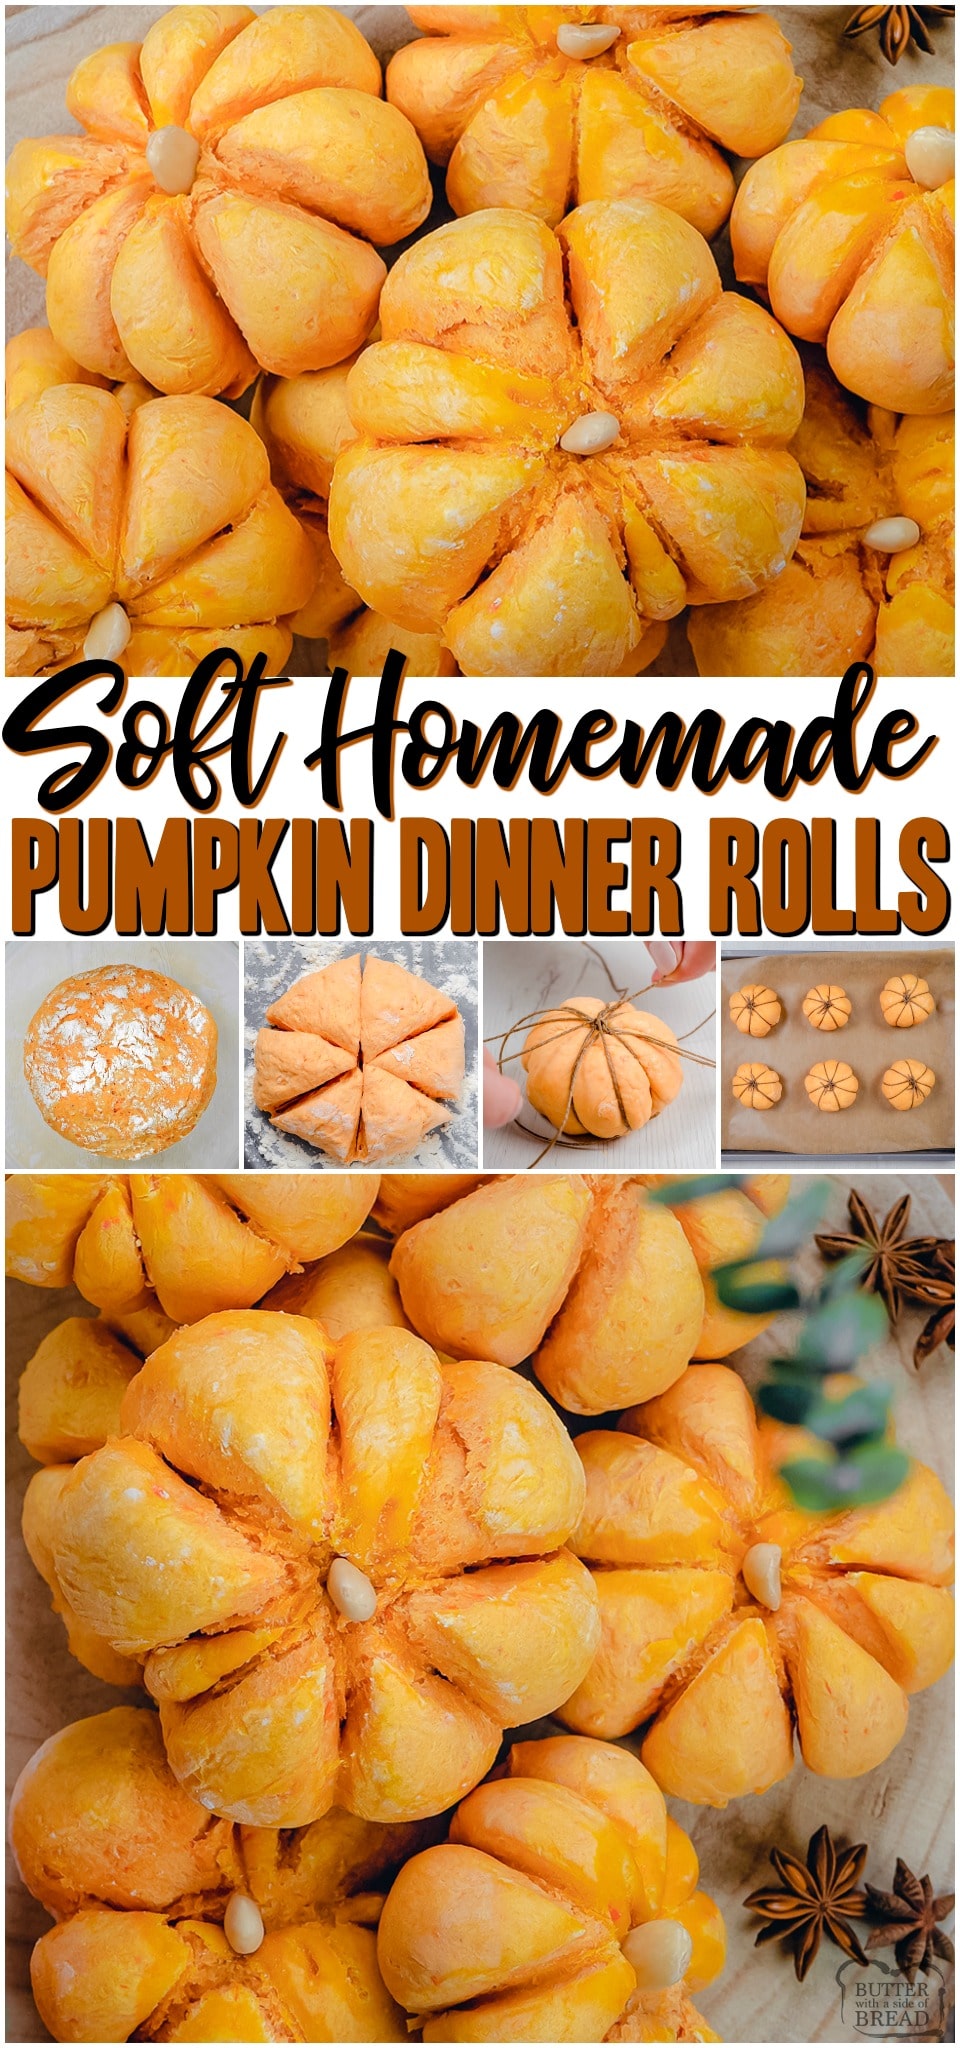 Pumpkin Dinner Rolls are soft & feathery homemade rolls that are shaped like pumpkins! Easy yeast dinner rolls made with pumpkin for a perfectly festive addition to dinner.